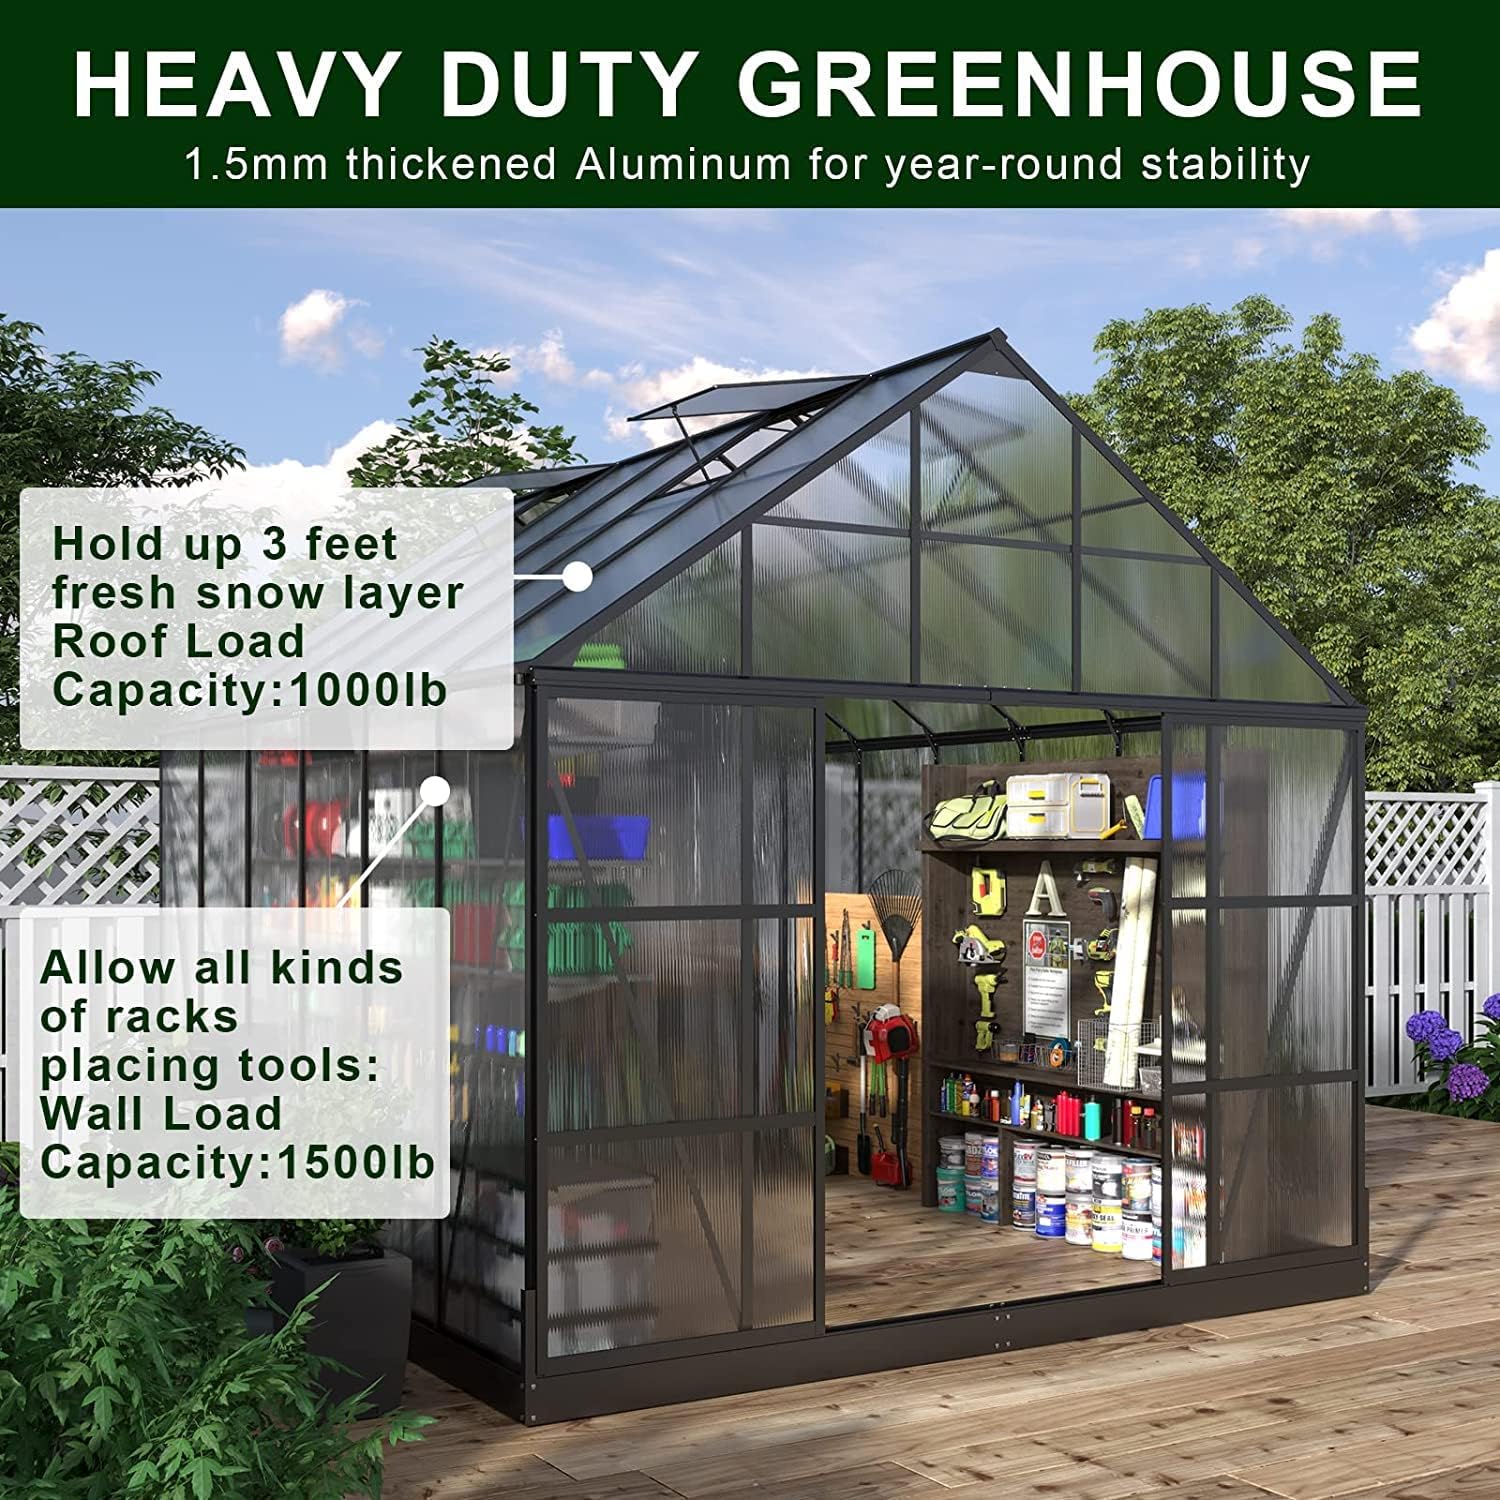 AMERLIFE 12x10x10FT Polycarbonate Greenhouse 2 Sliding Doors 4 Vents Walk-in Premium Professional Greenhouse Storage Shed Sunroom Aluminum Large Hot House for Outdoor Garden Backyard Matte Black - image 3 of 7